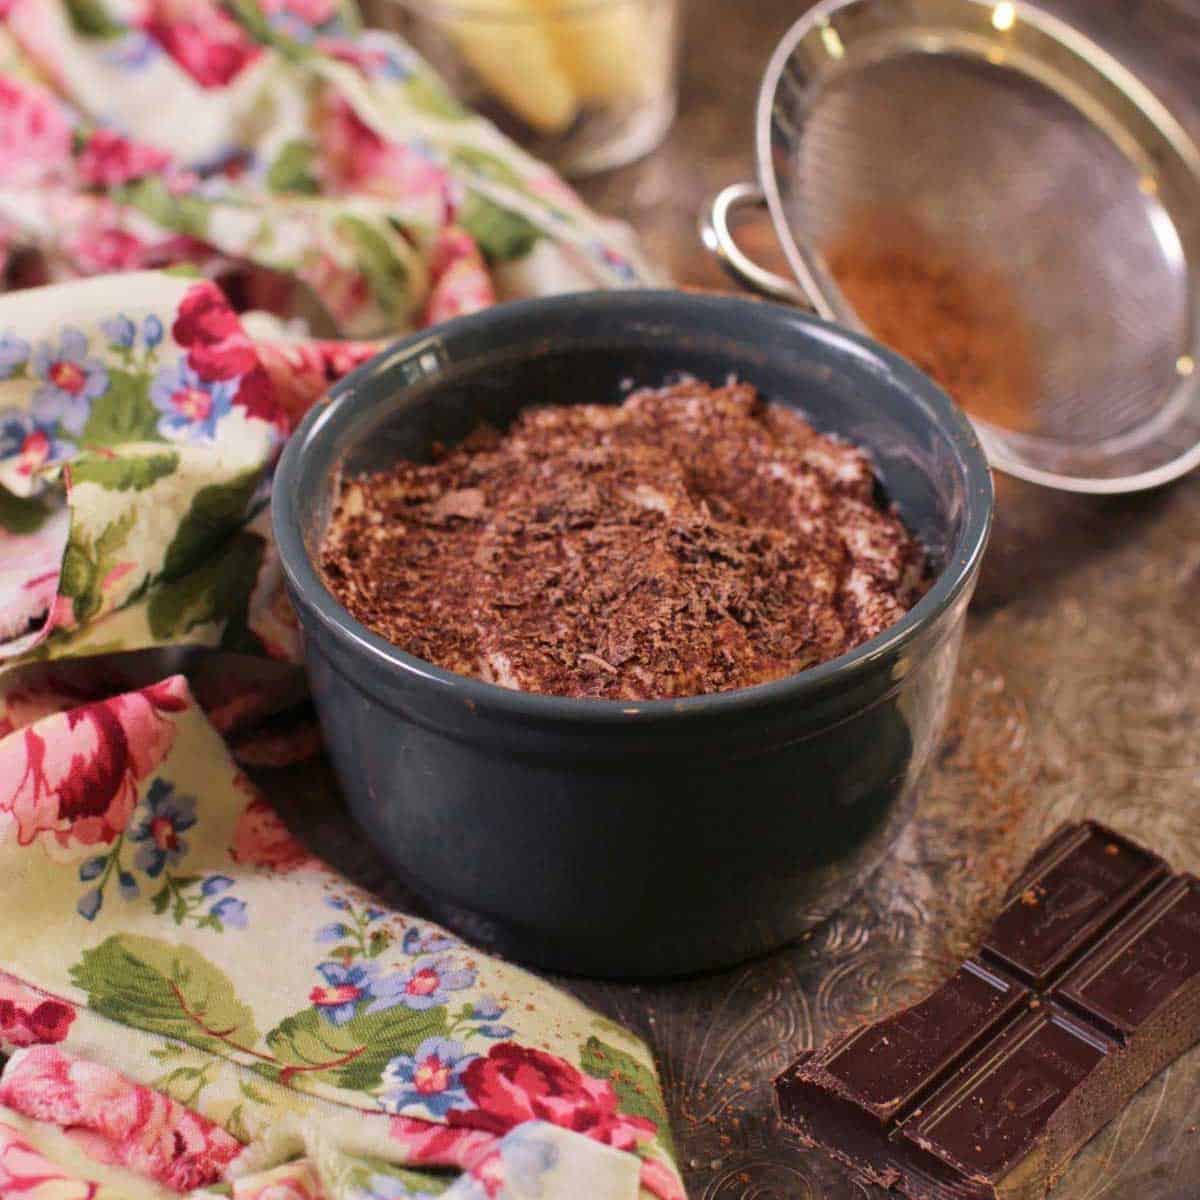 A mini tiramisu topped with chocolate shavings in a circular dish on a metal tray with a floral cloth napkin, a piece of a chocolate bar, and cocoa powder in a sieve.